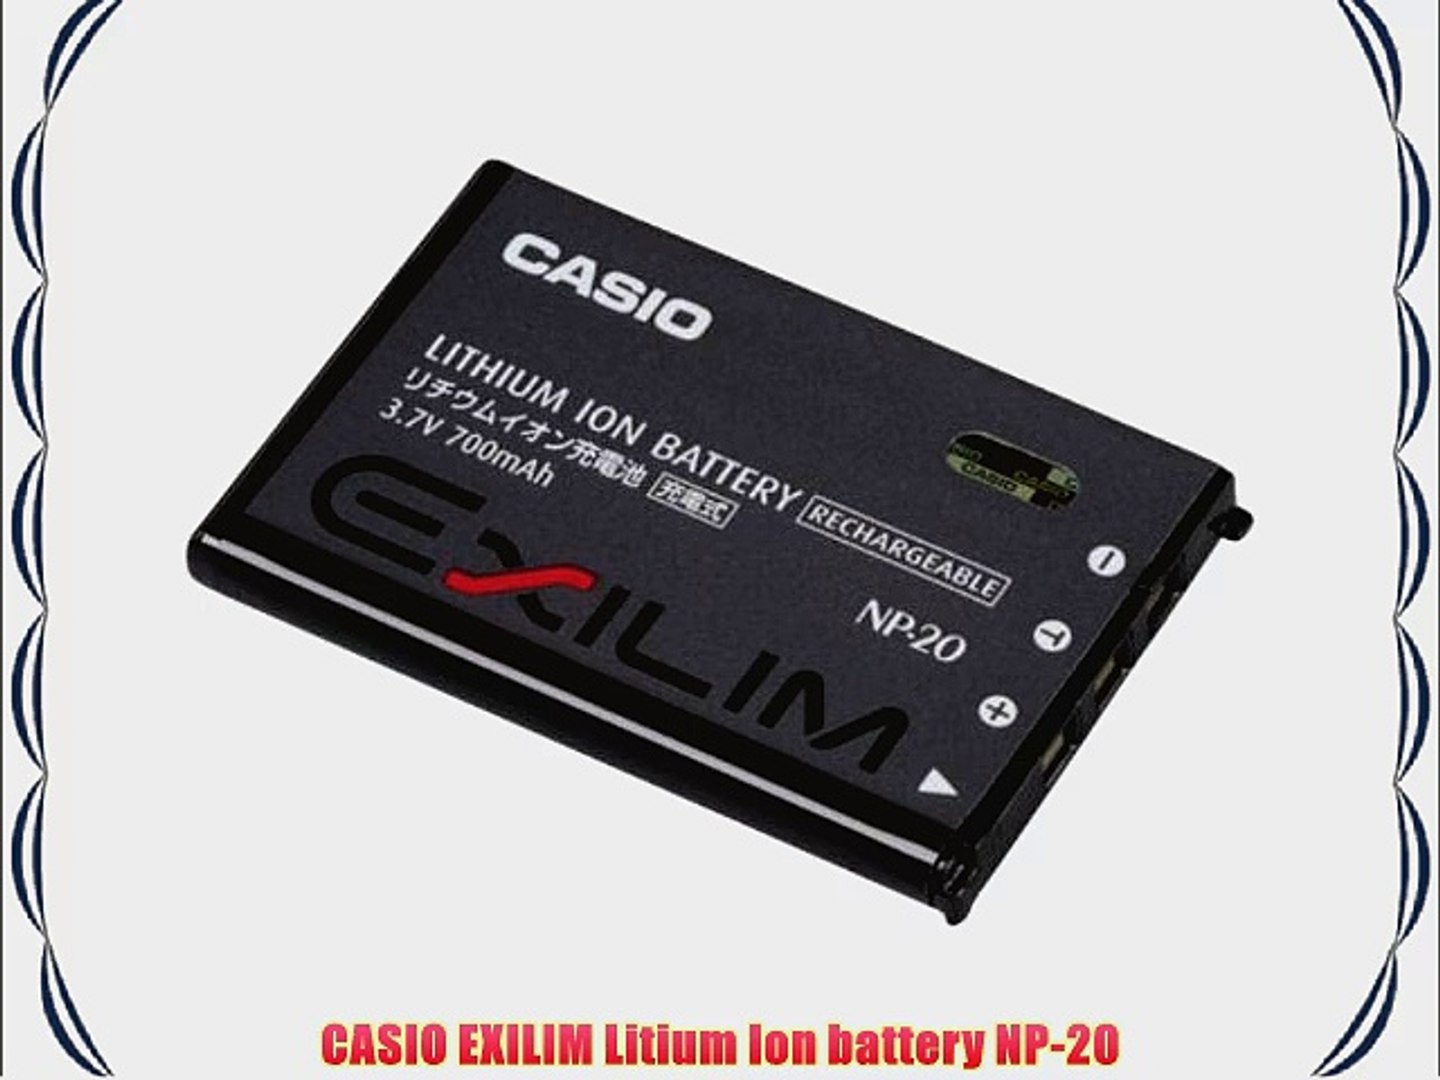 CASIO EXILIM Litium Ion battery NP-20 - video Dailymotion